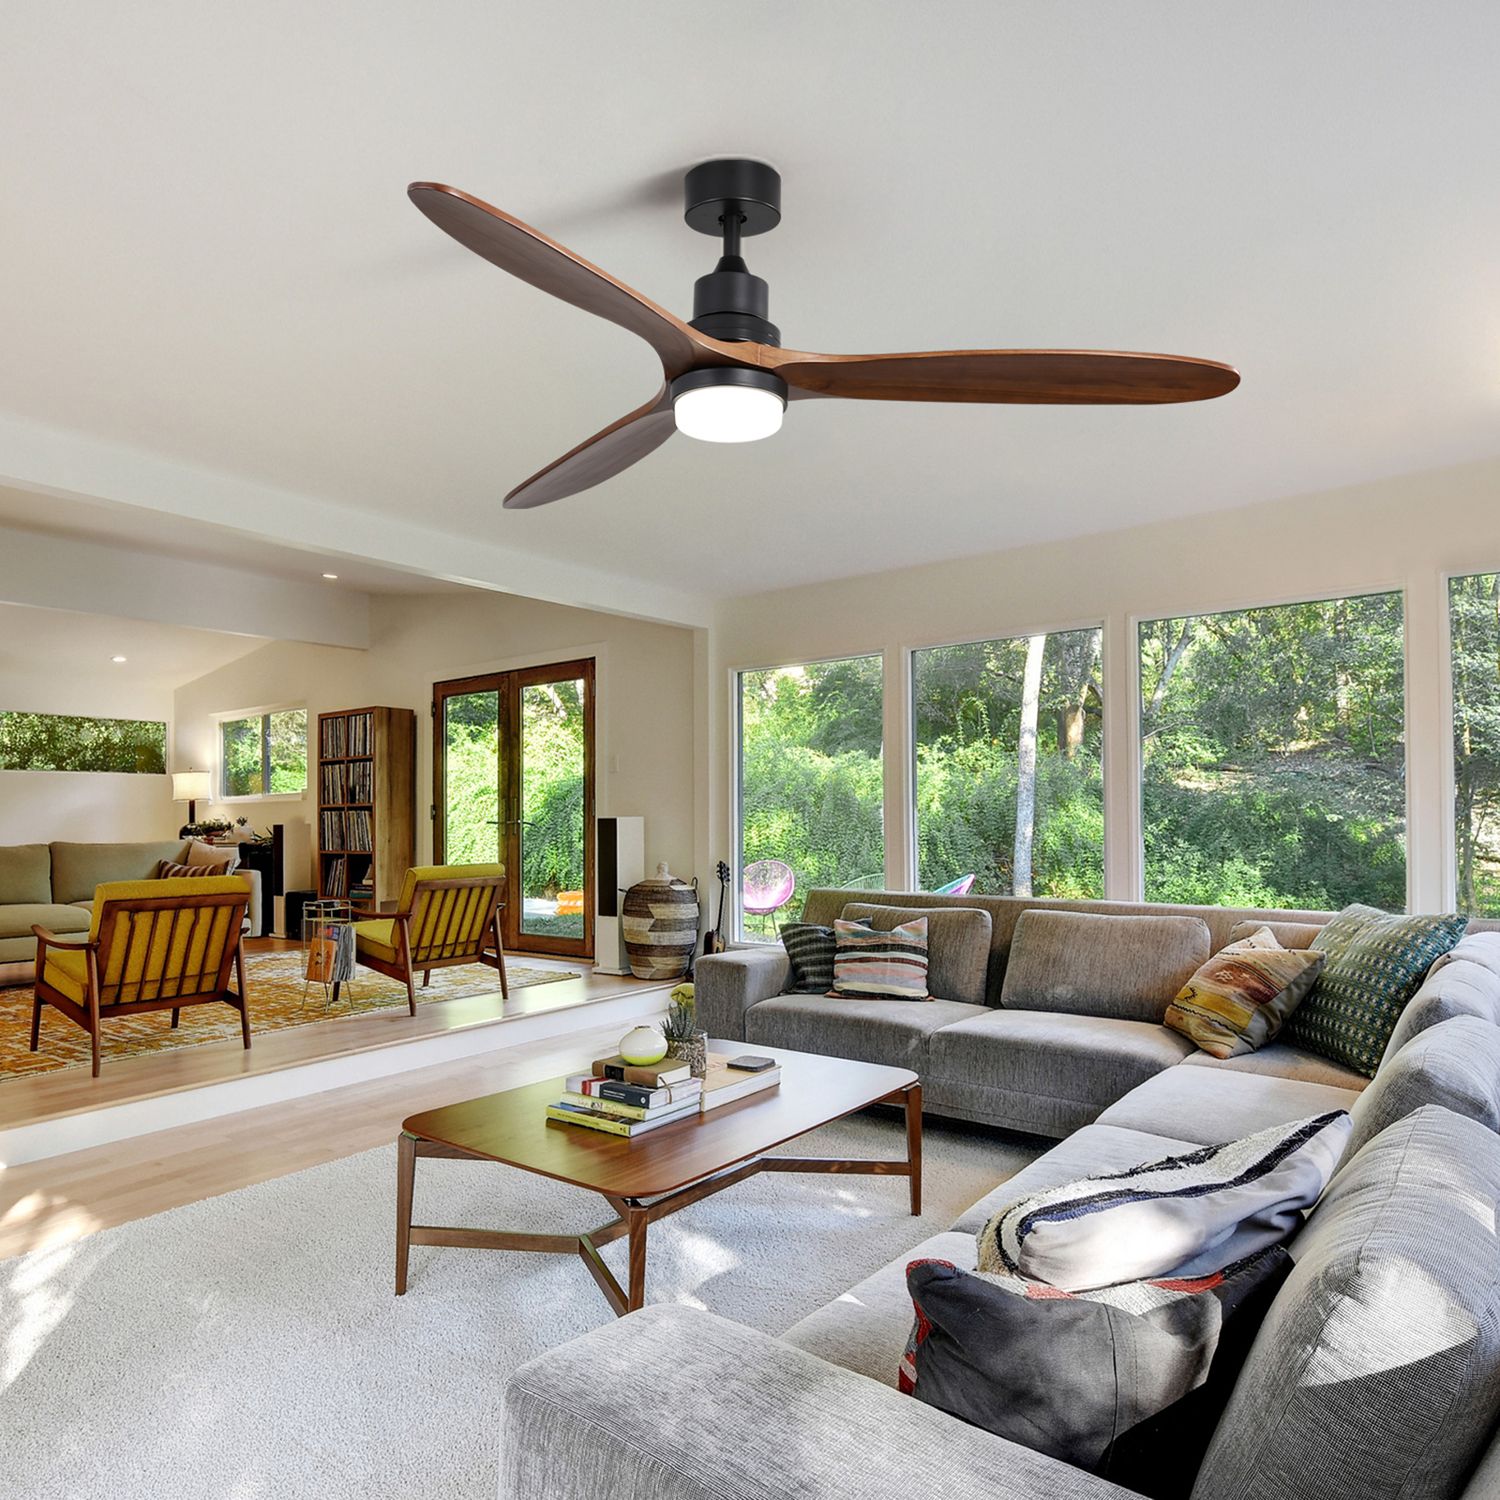 KBS Wood Design Reversible Ceiling Fan with Remote and light in a large living room